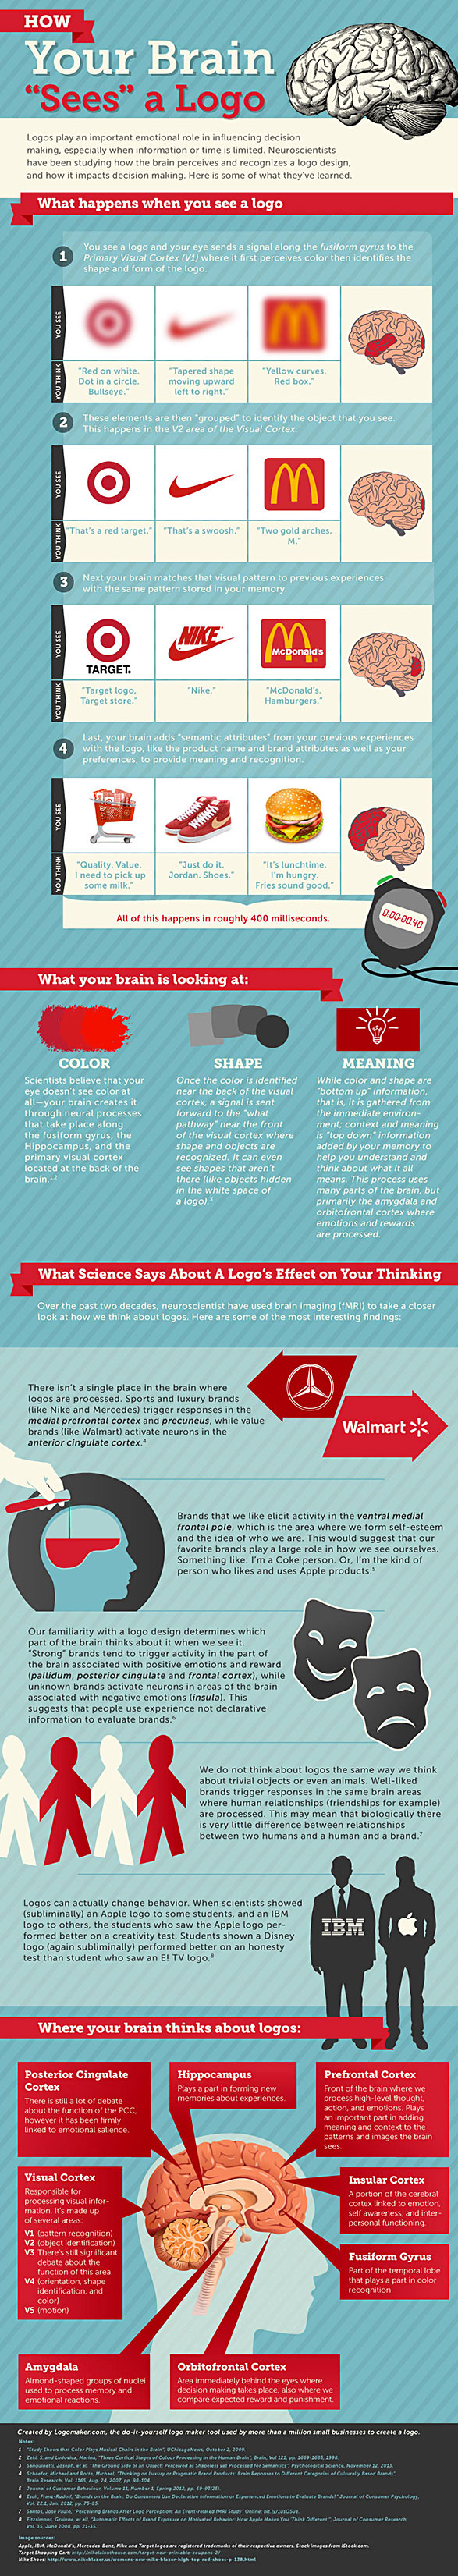 Infographic on how your brain breaks down a logo